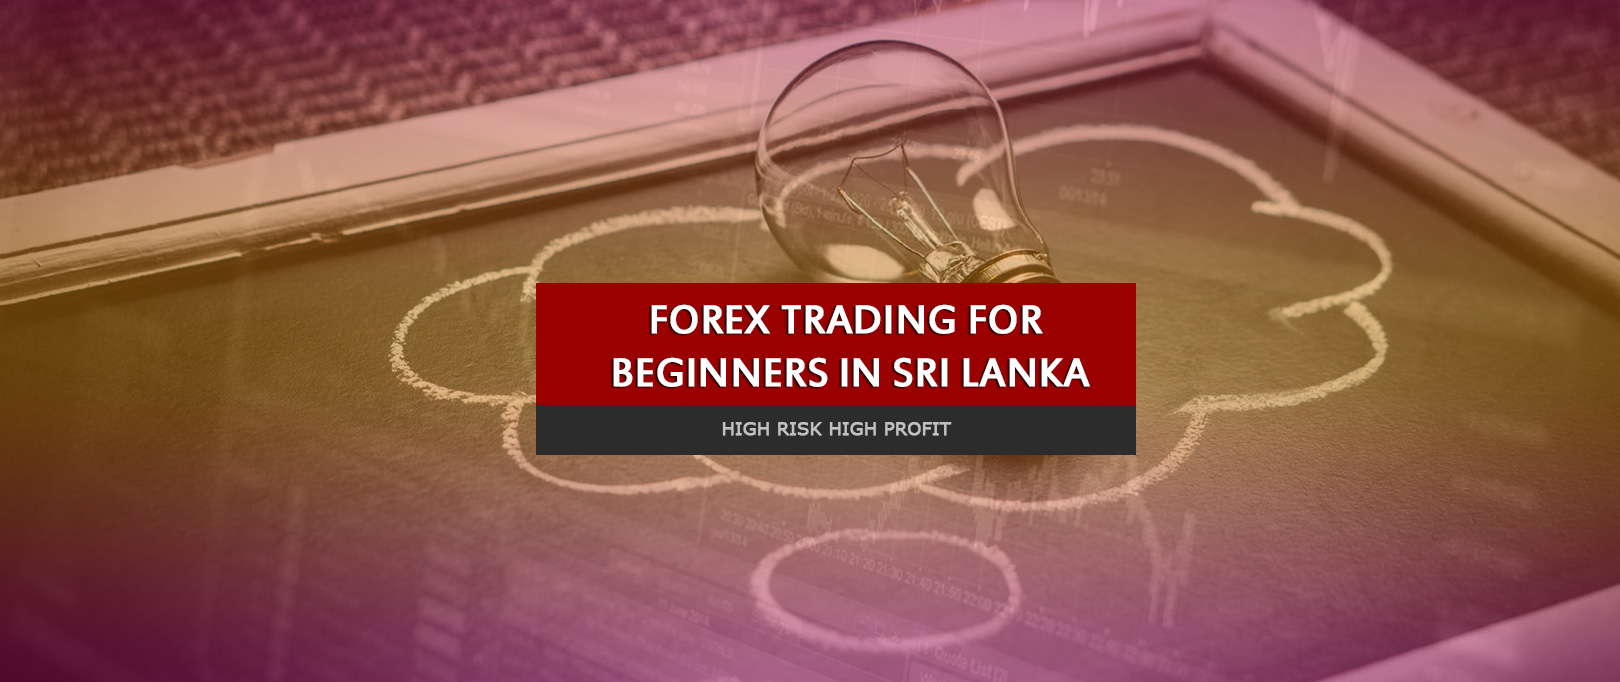 Forex trading is legal or illegal in sri lanka